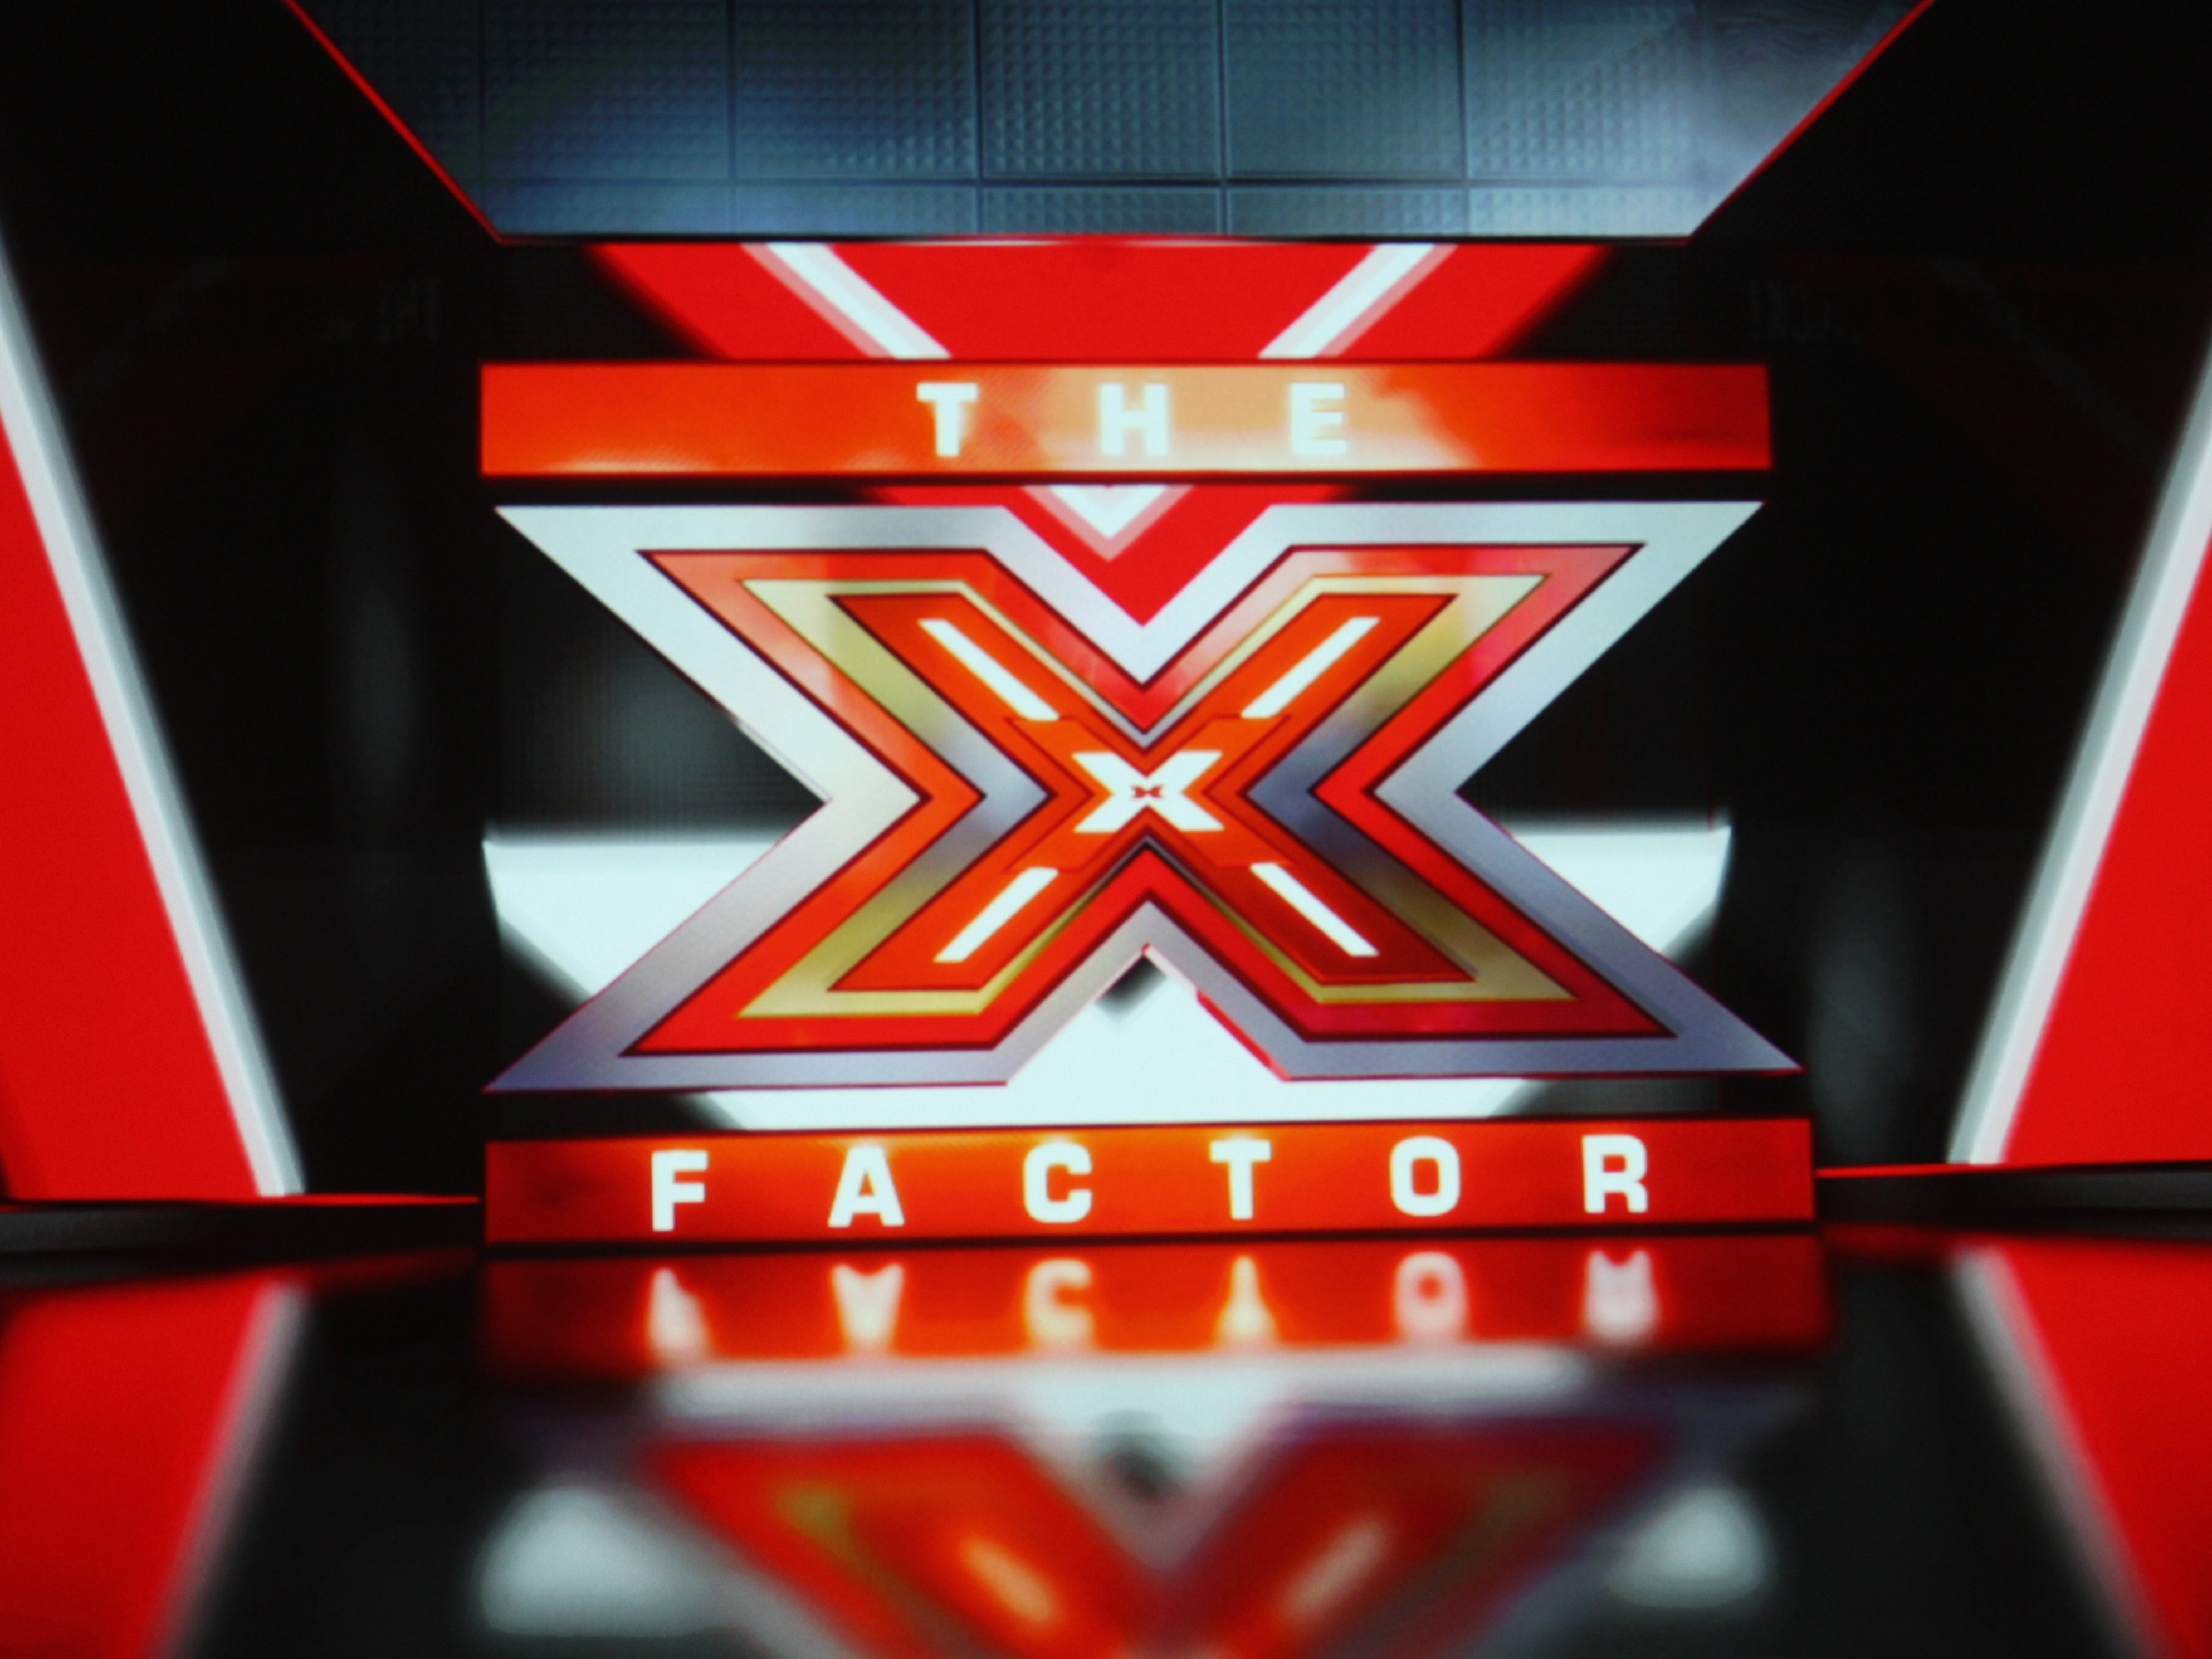 ‘The X Factor’ was always as much about ridicule as it was success